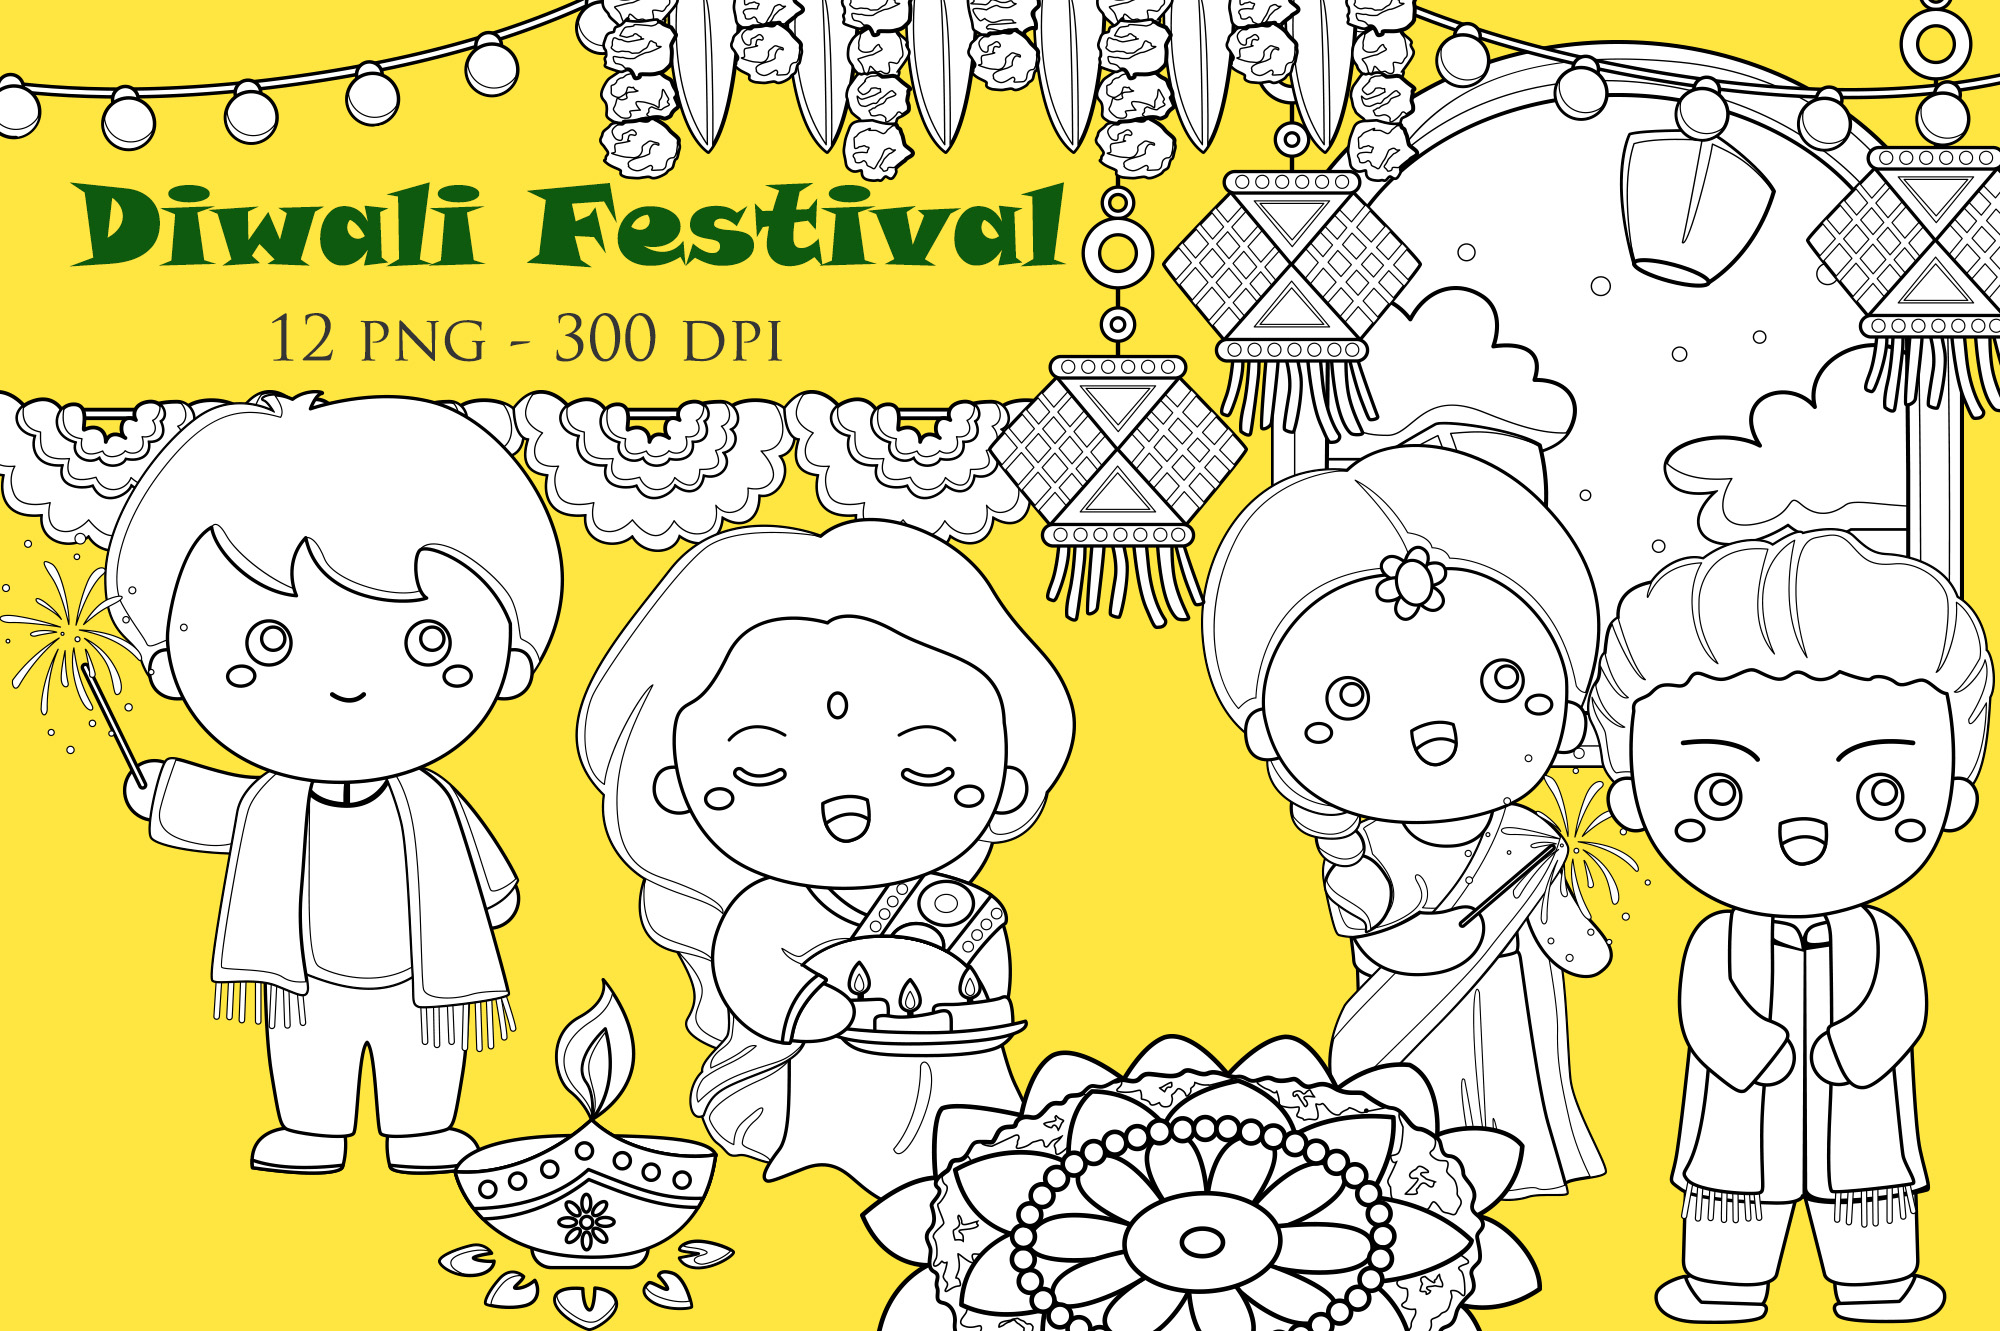 How to Draw Holi Festival Drawing Part 2 Indian Festival Drawing - YouTube-saigonsouth.com.vn